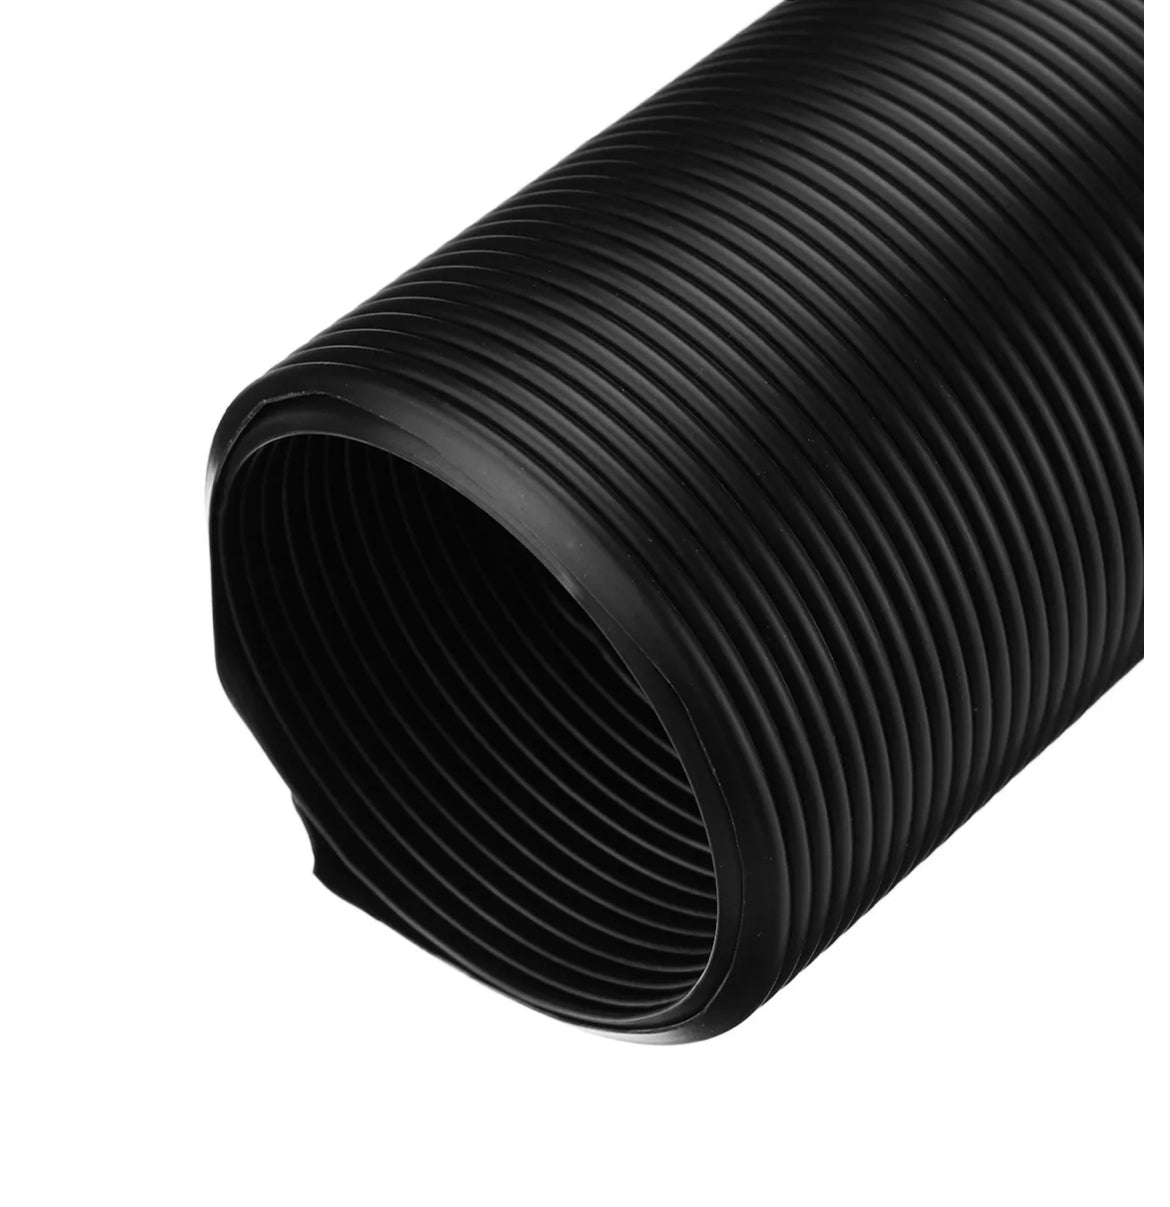 76mm 1M Car Air Intake Cold Pipe Flexible Ducting Feed Hose Induction Kit Black